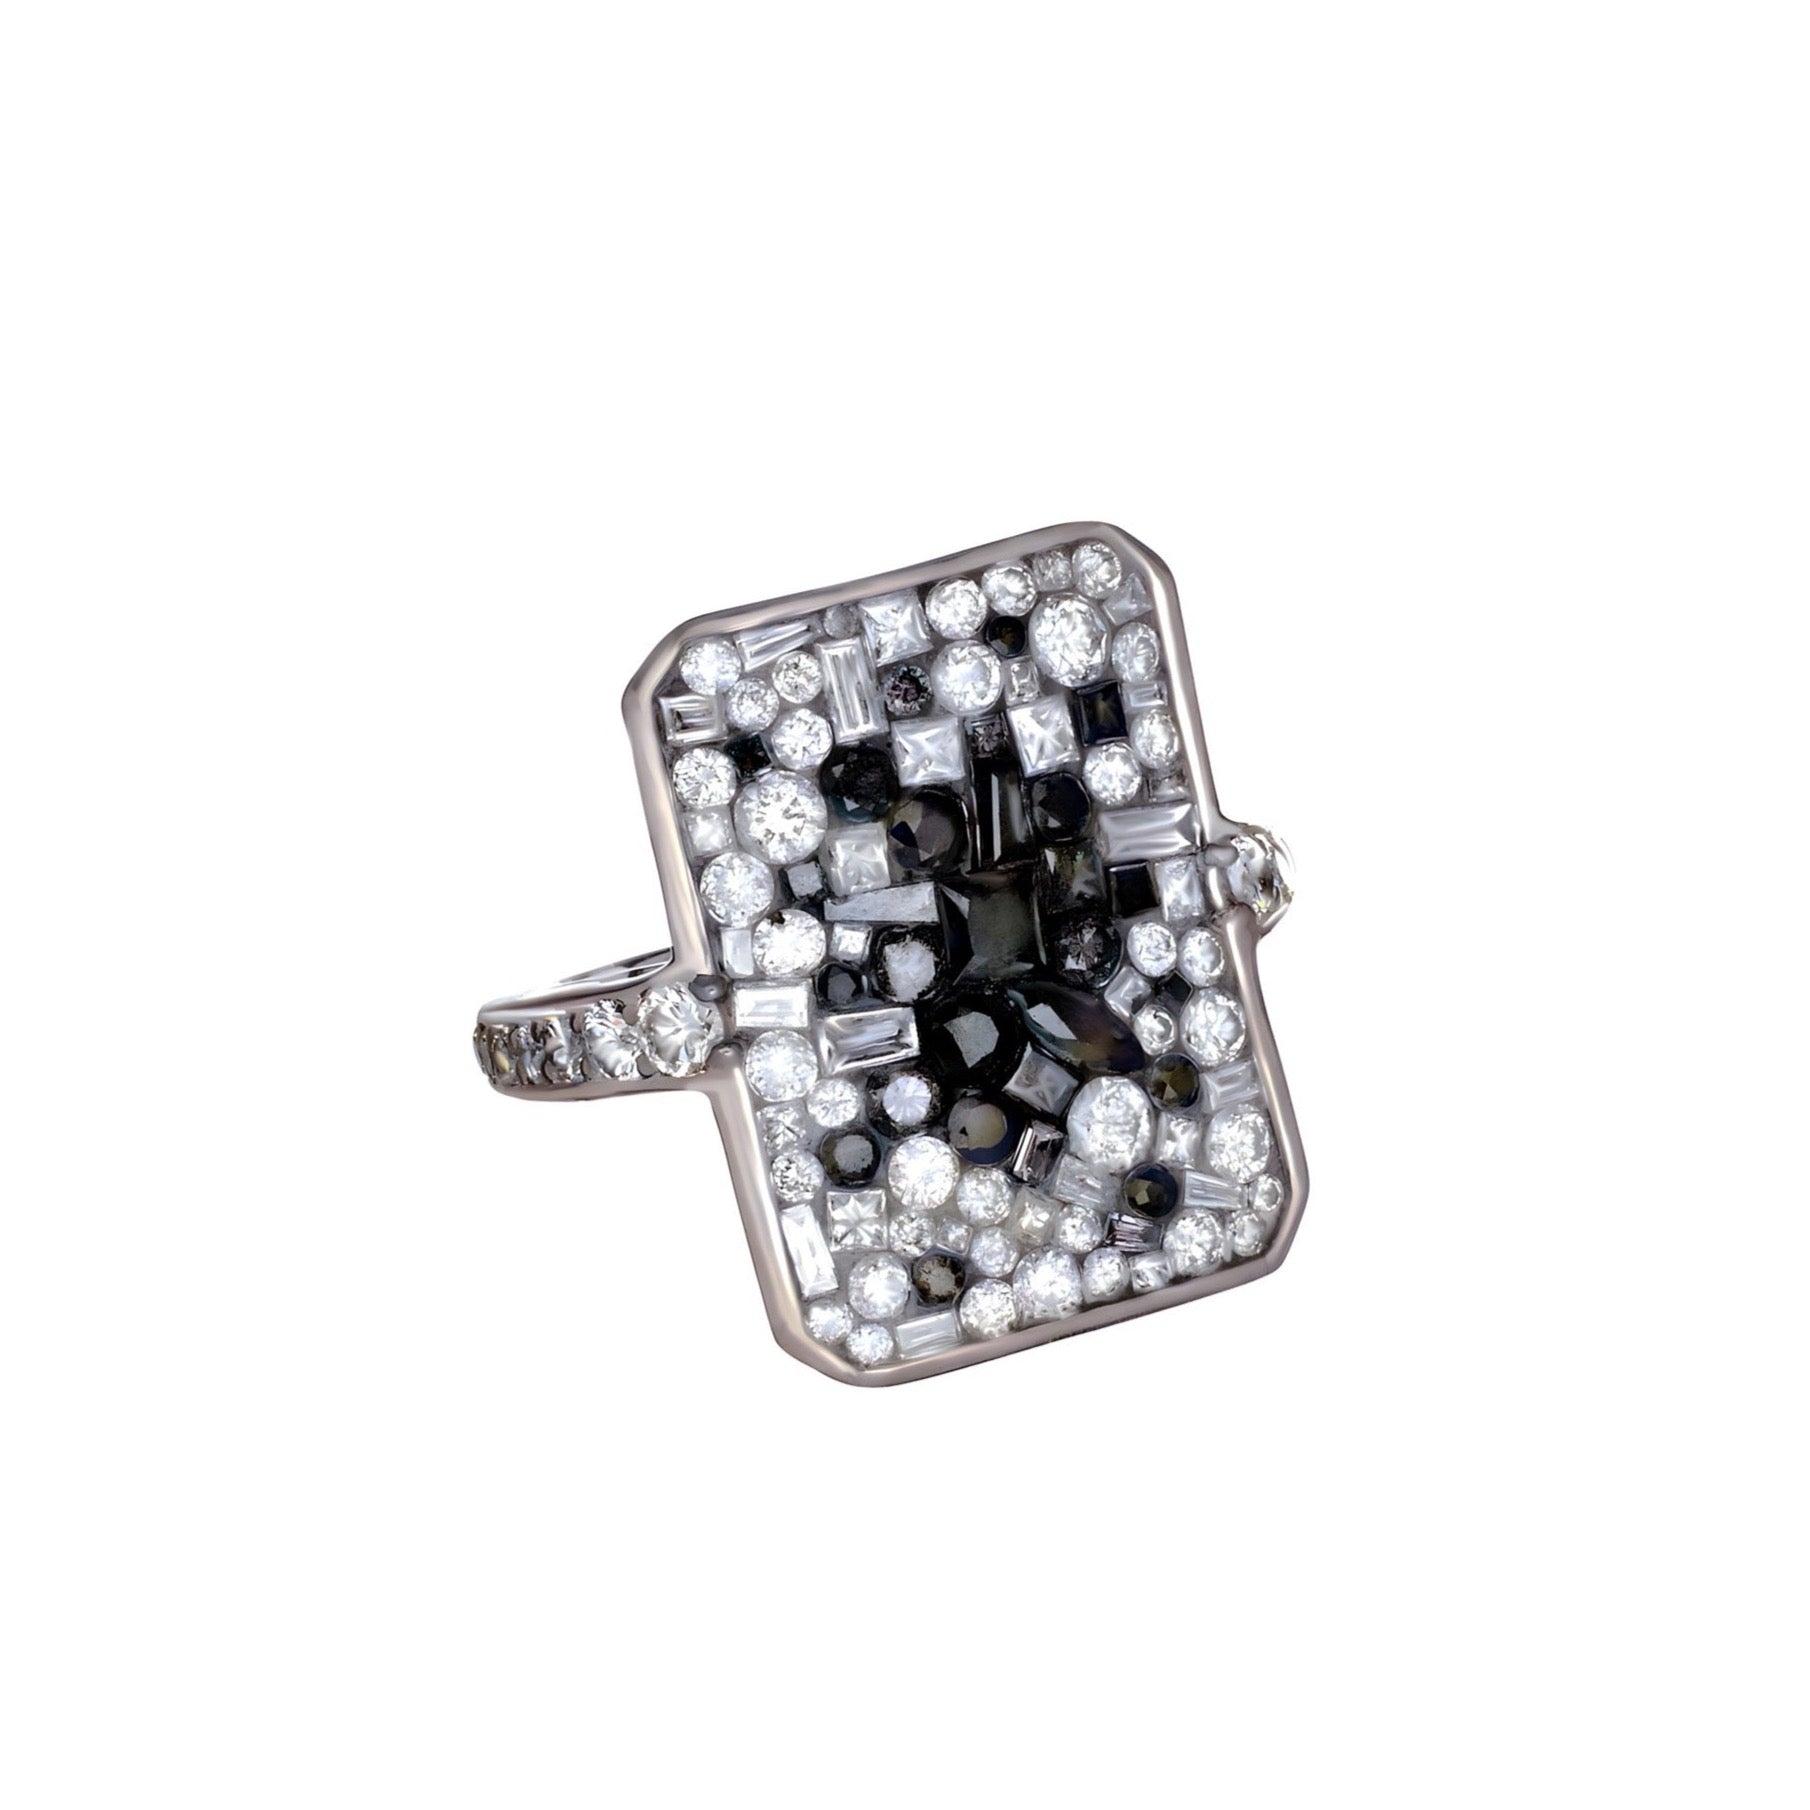 Black Galaxy Emerald Cut Diamond Ring available at Talisman Collection Fine Jewelers in El Dorado Hills, CA and online. Specs: Black Galaxy Emerald Cut Diamond Ring 2.60 cts white & black color enhanced diamonds; 18k white gold. 